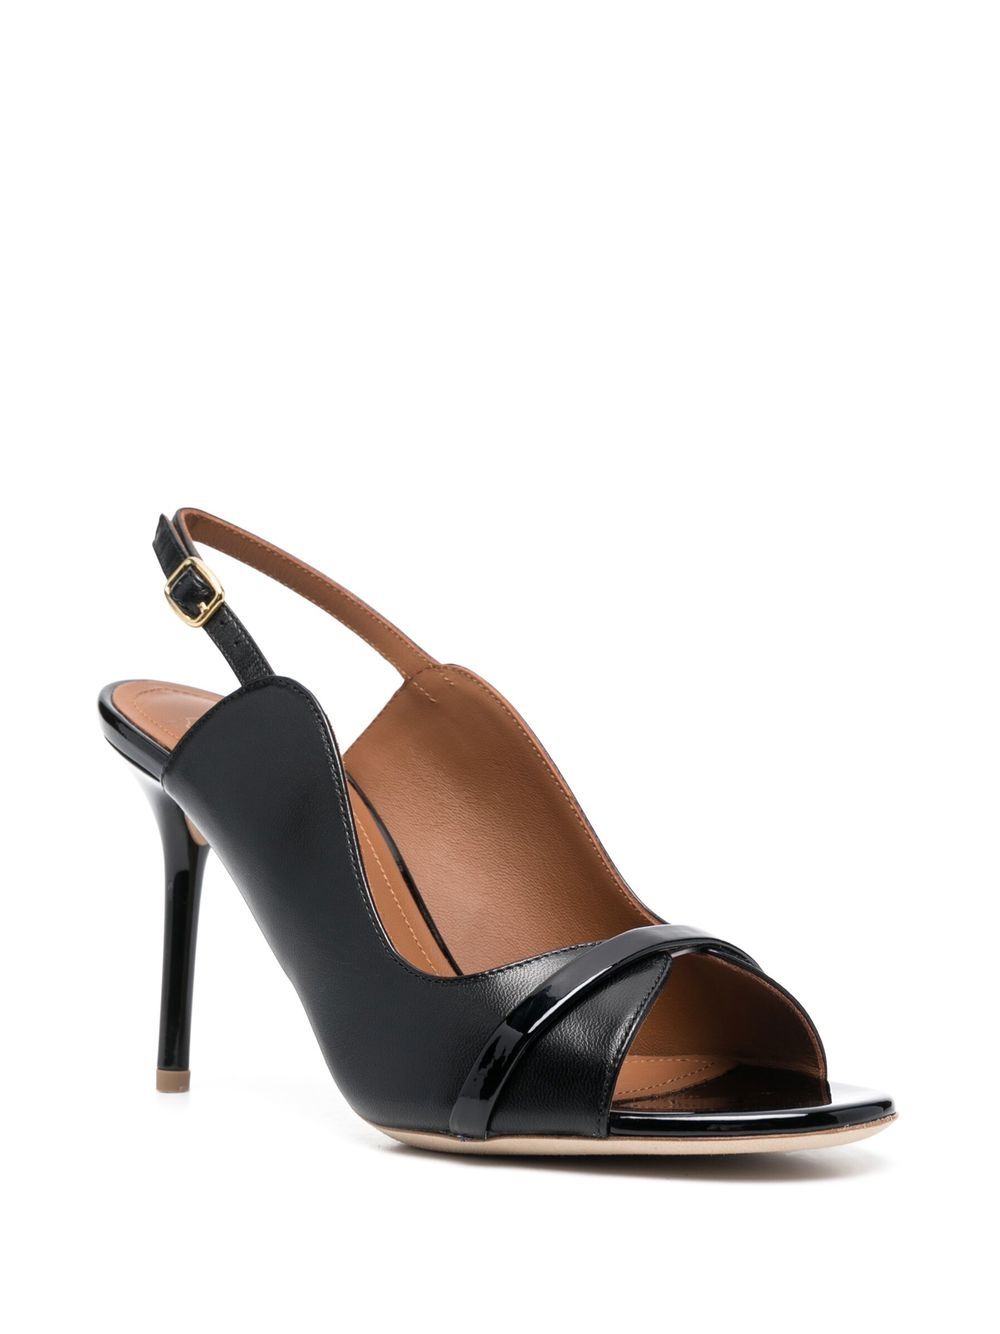 Malone Souliers Malone Souliers With Heel Black